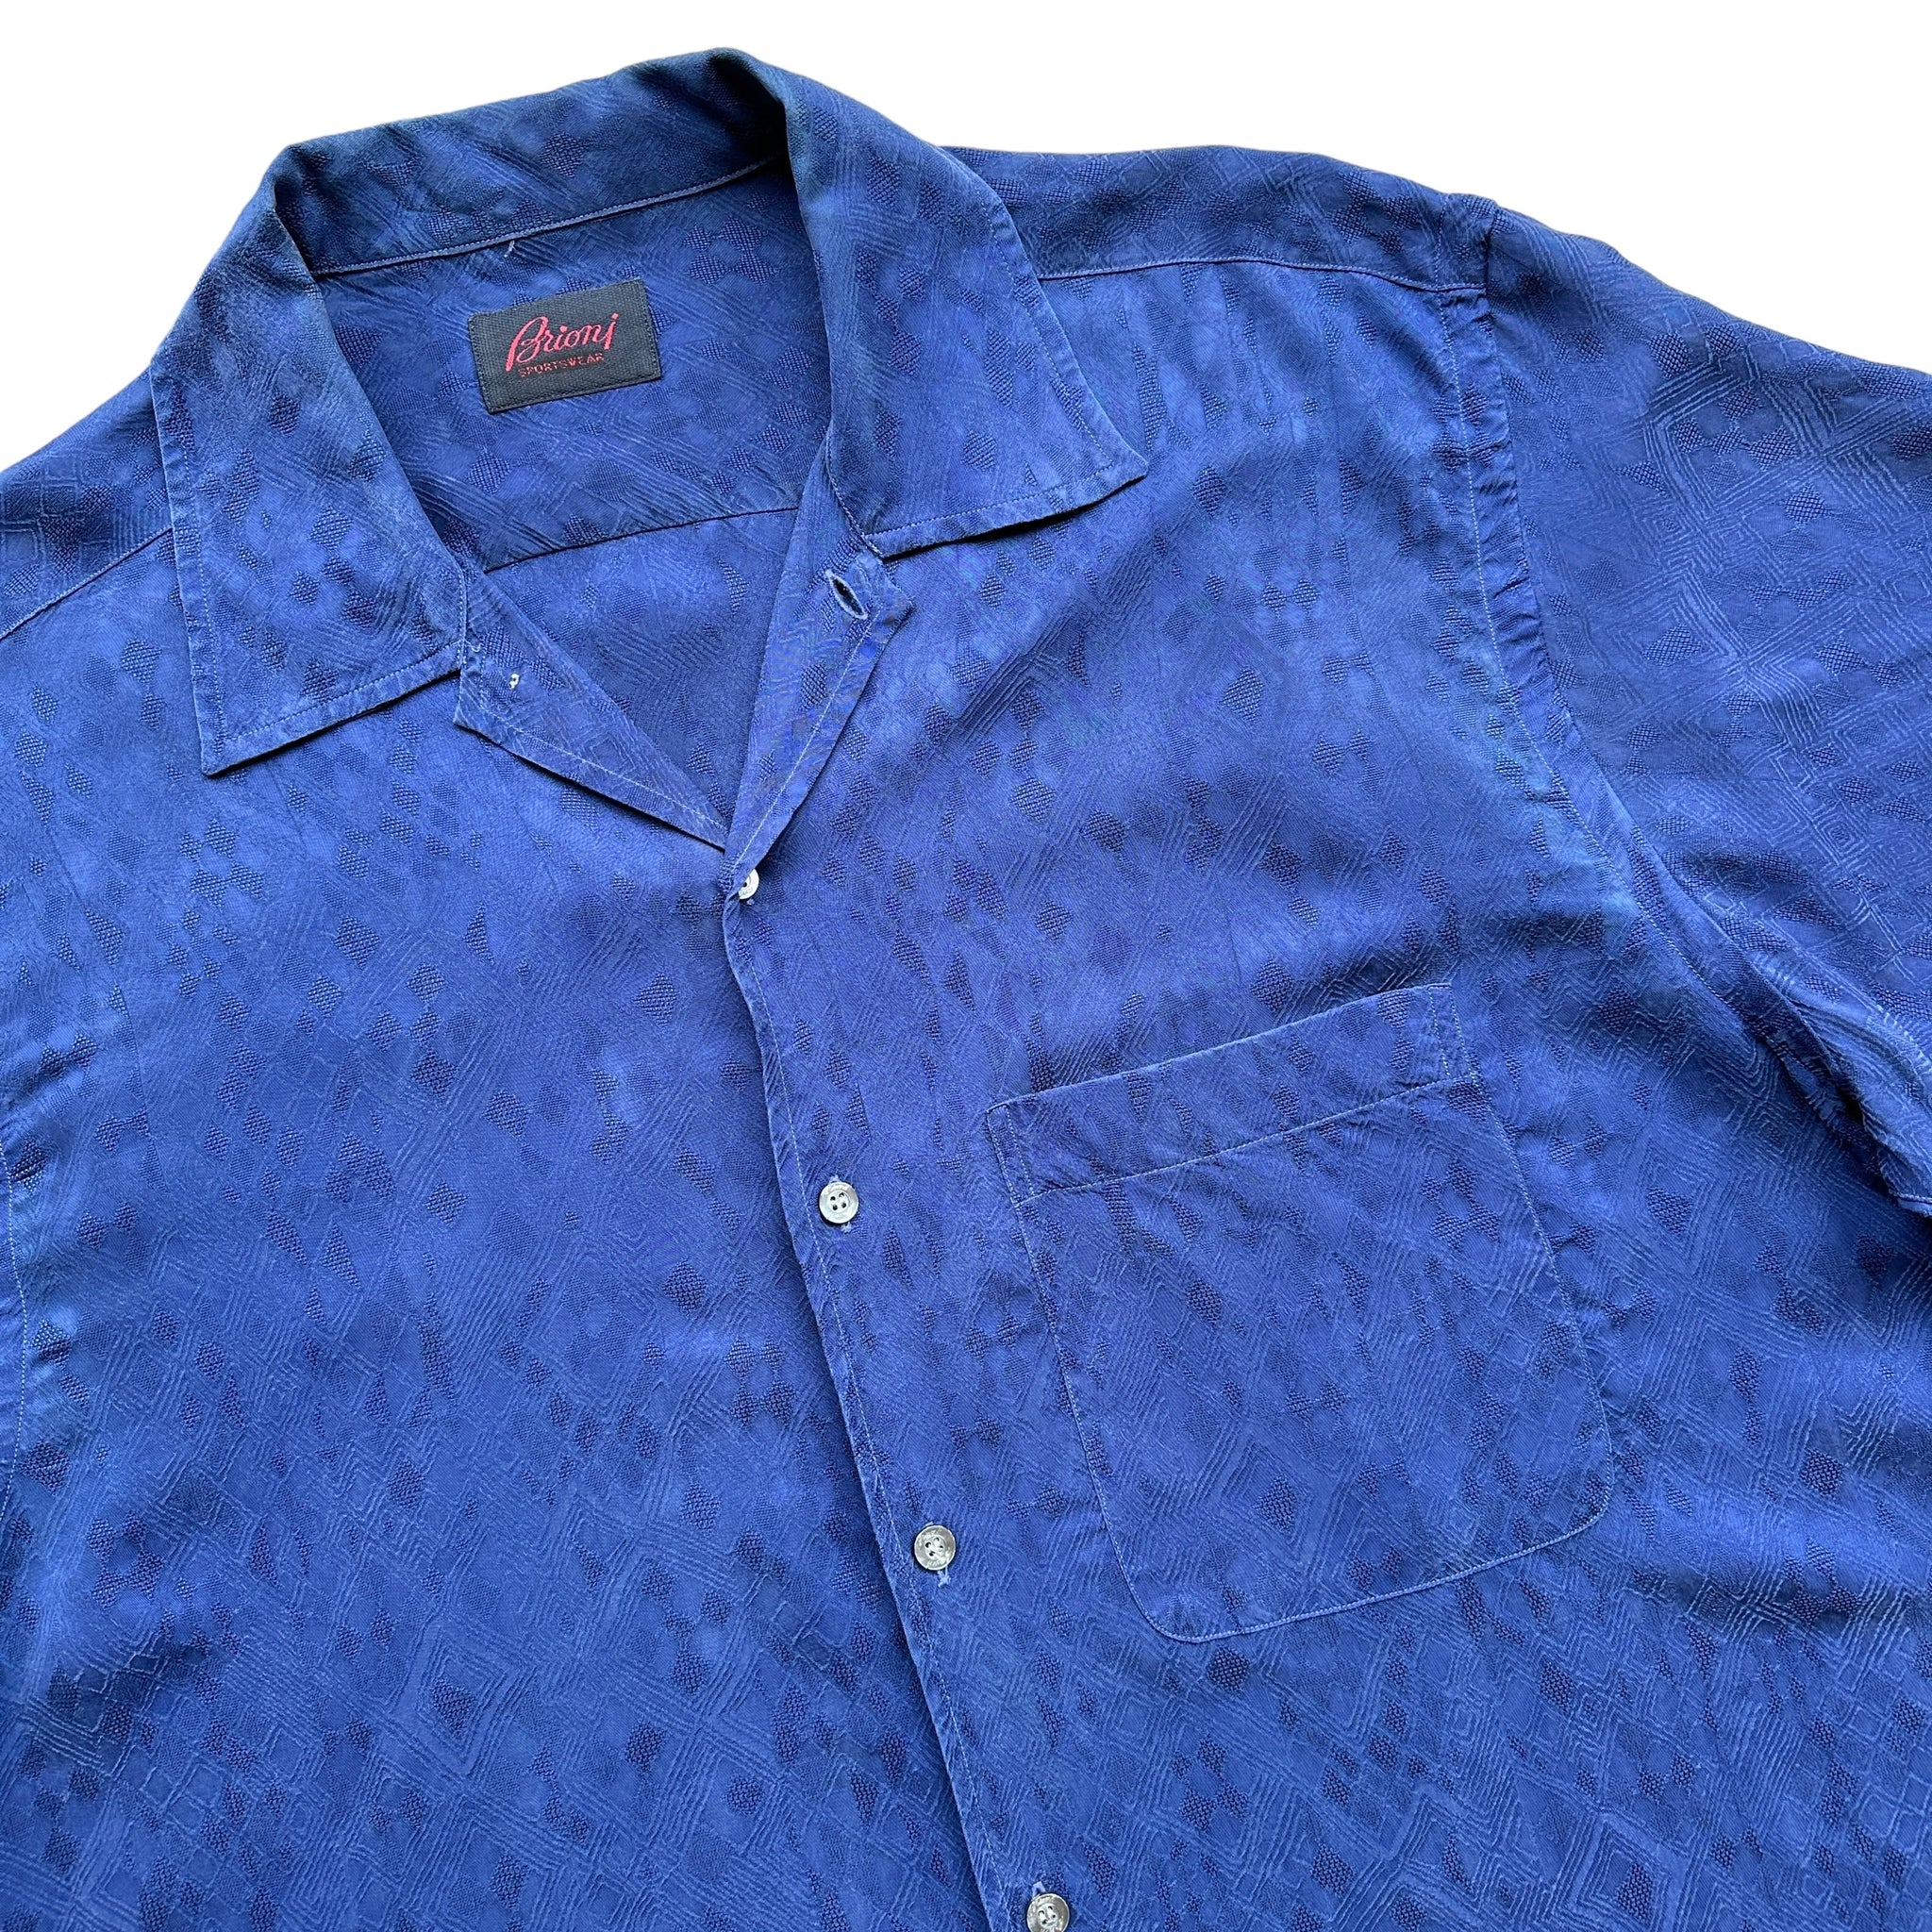 Brioni rayon shirt large Made in italy🇮🇹